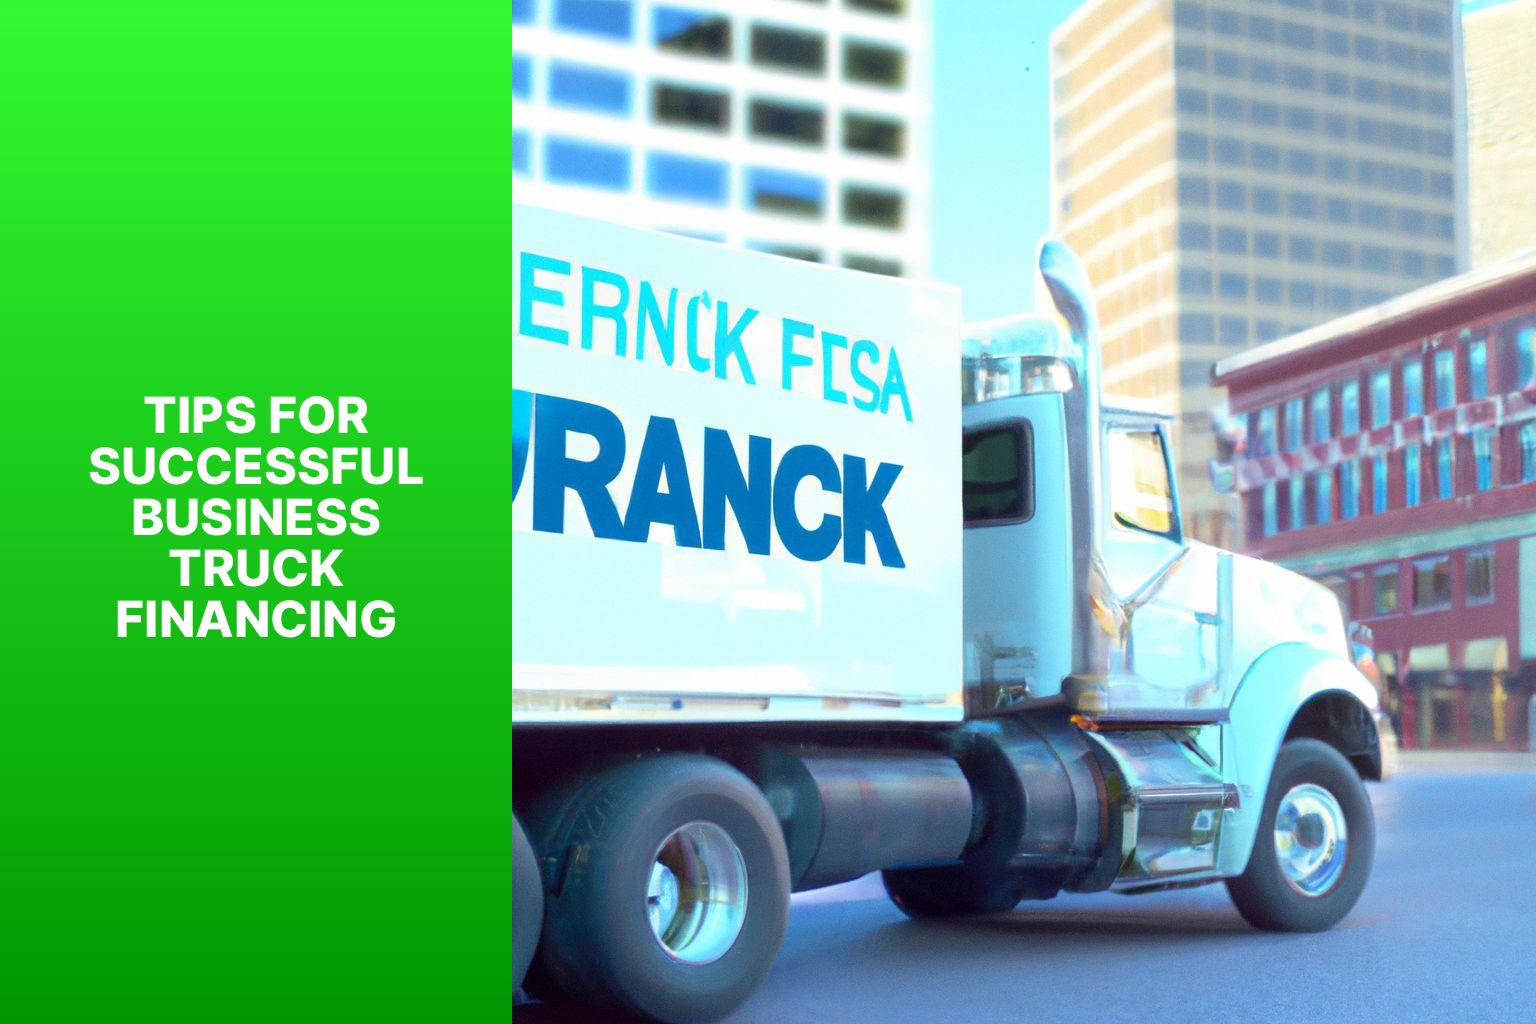 Tips for Successful Business Truck Financing - On the Move: Understanding Business Truck Finance 